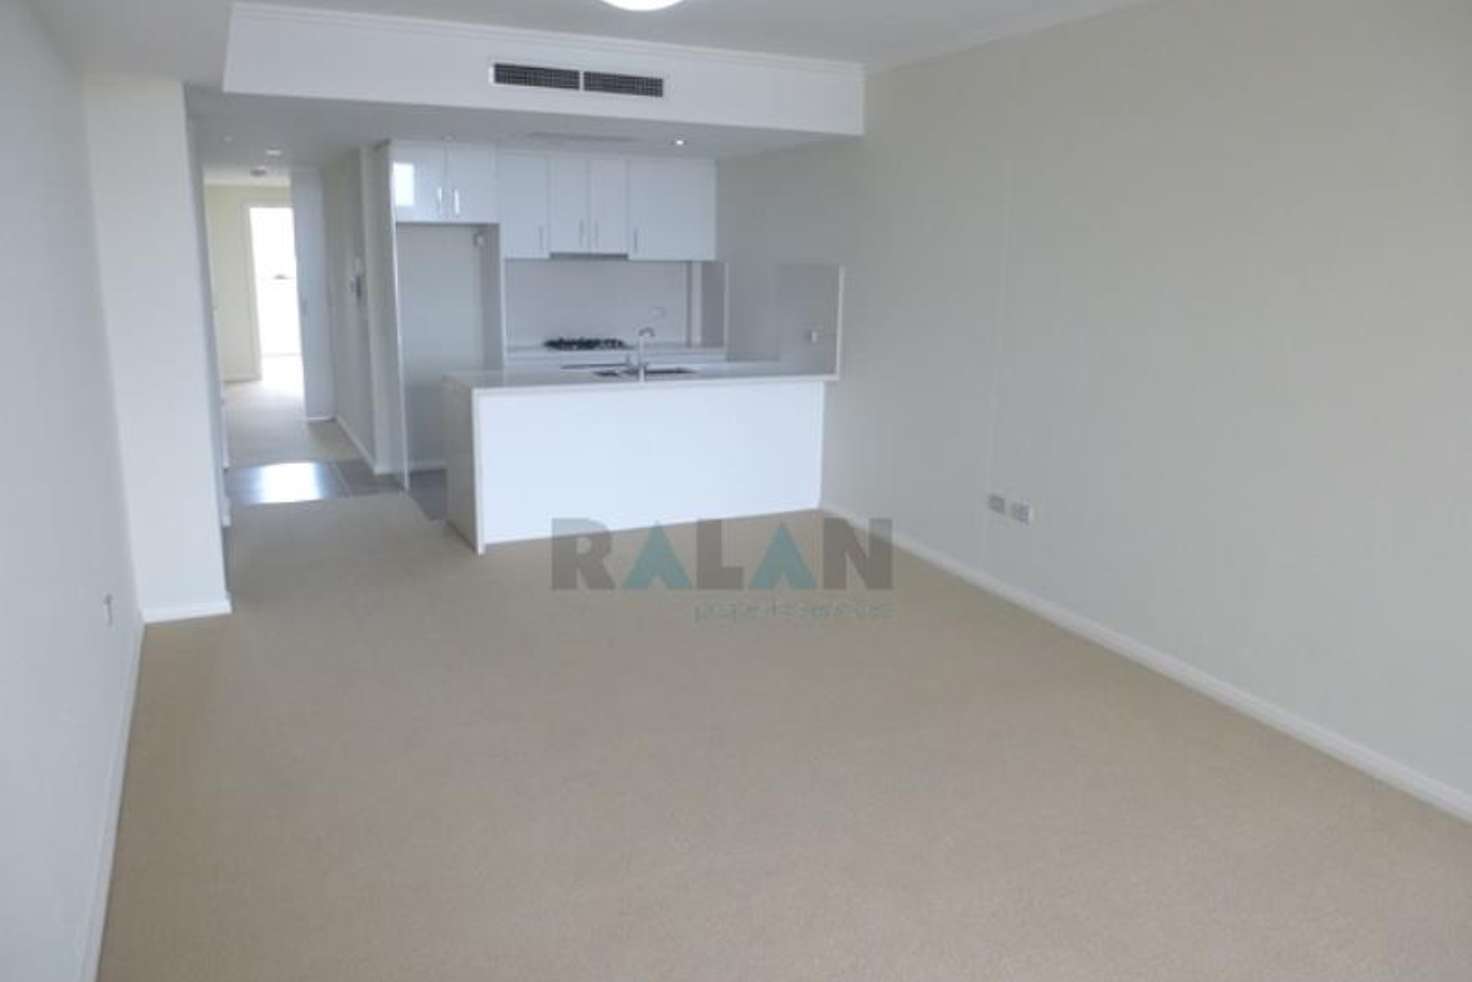 Main view of Homely apartment listing, 16/38 Shoreline Drive, Rhodes NSW 2138